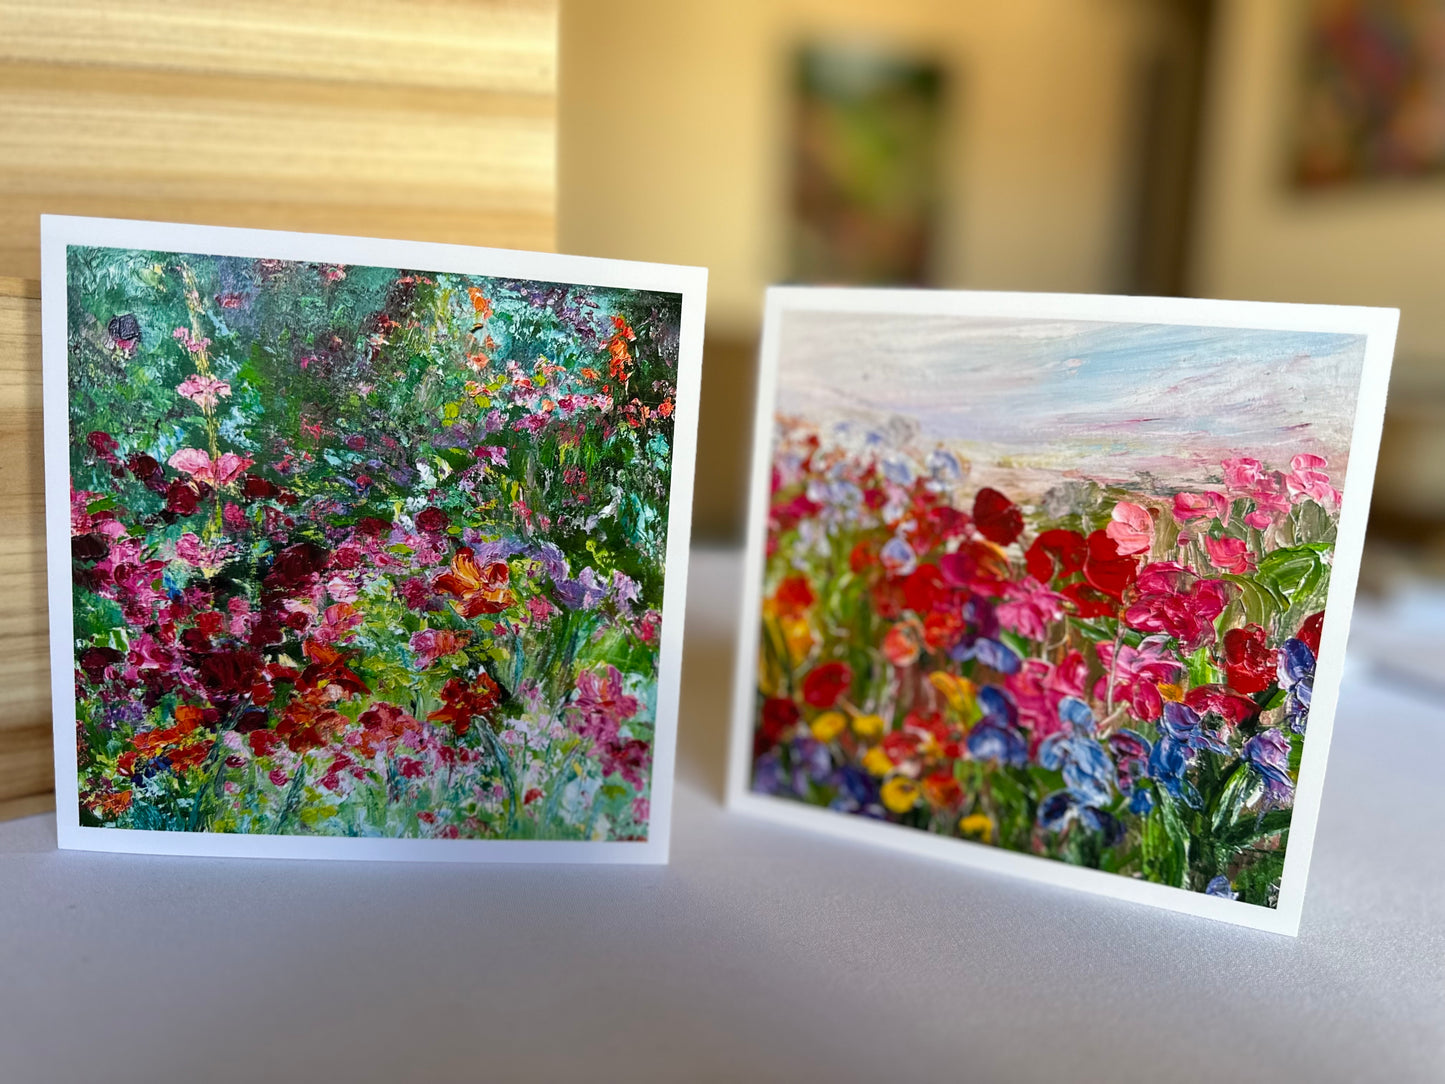 The Flowers Collection: Set of 7 Square Greeting Cards with 7 Different Flower Field Designs